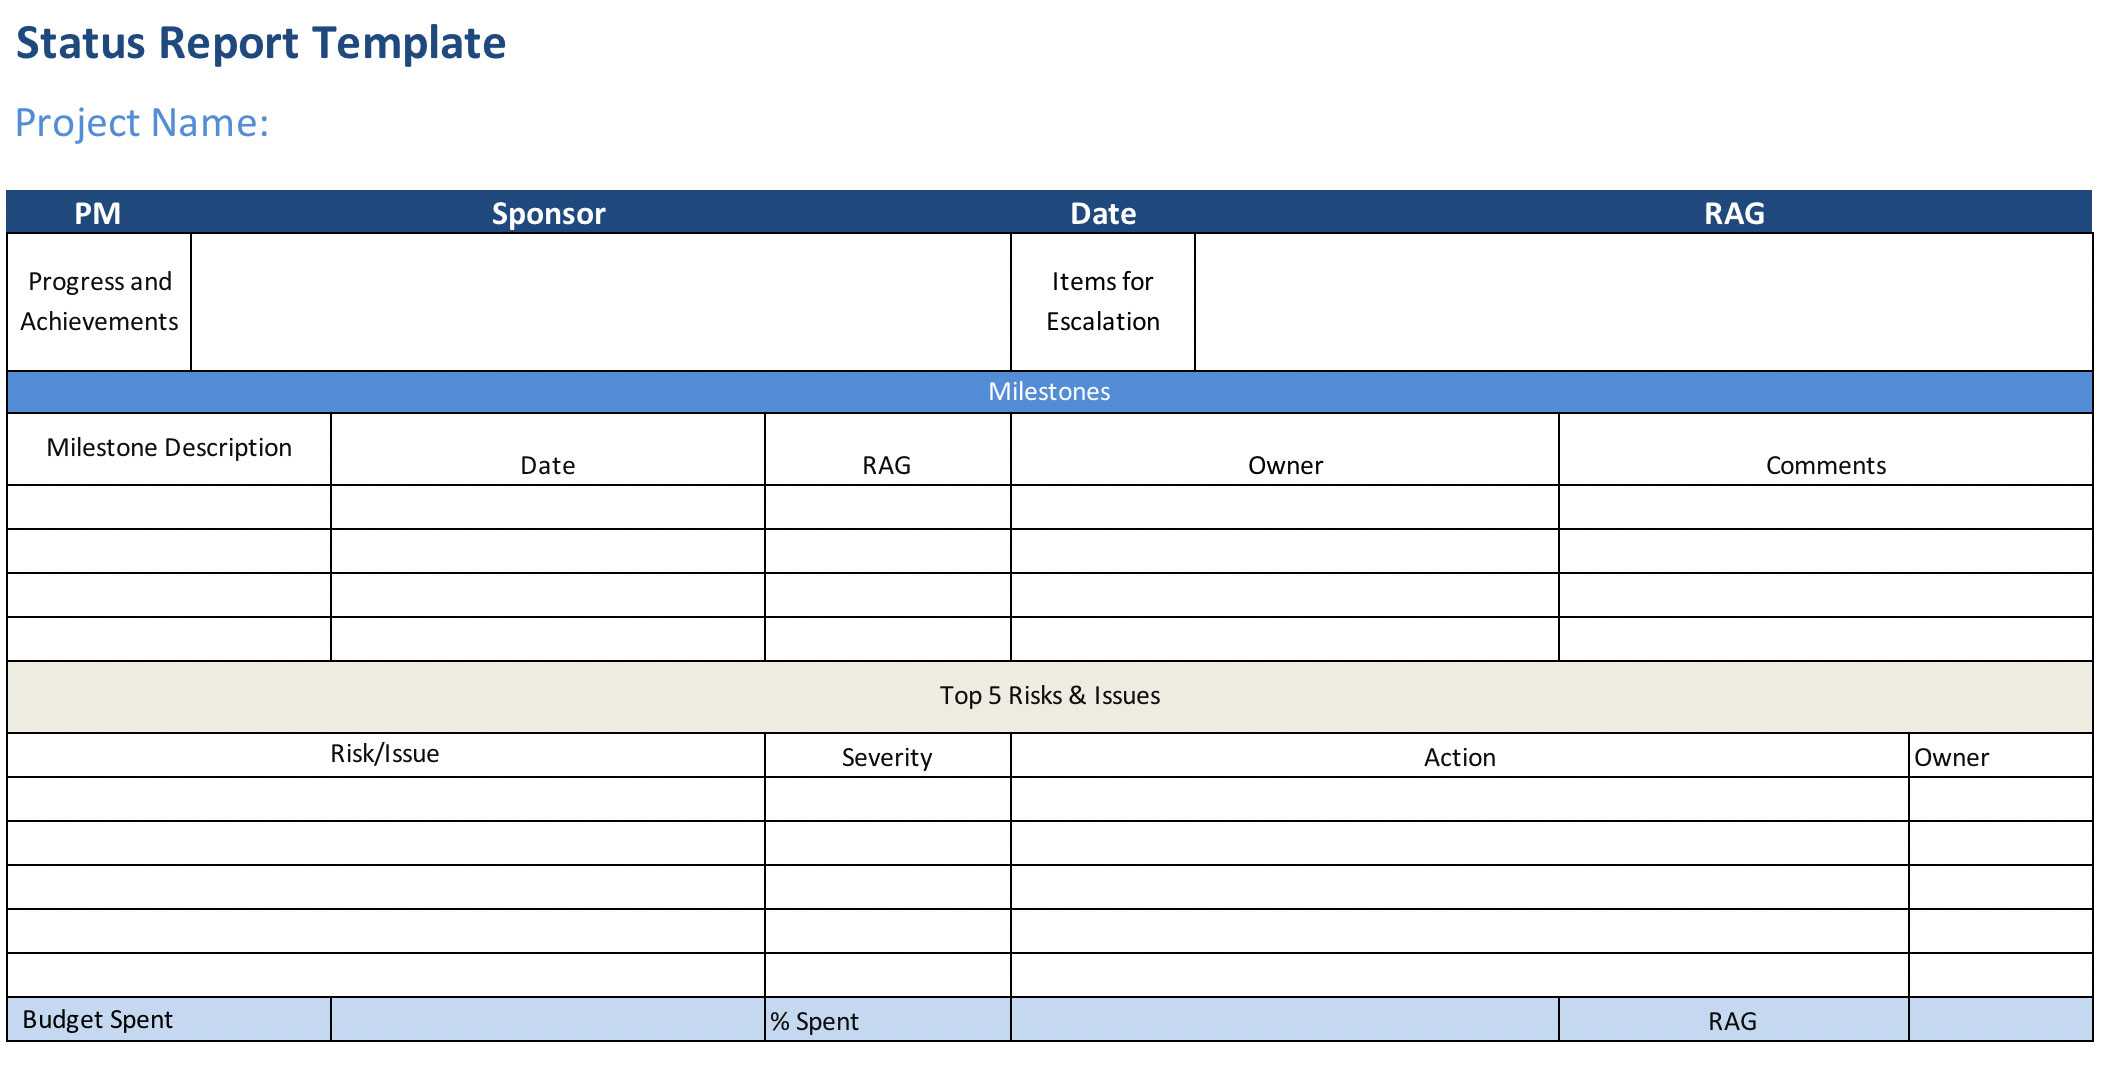 Project Status Report (Free Excel Template) - Projectmanager Throughout Project Manager Status Report Template